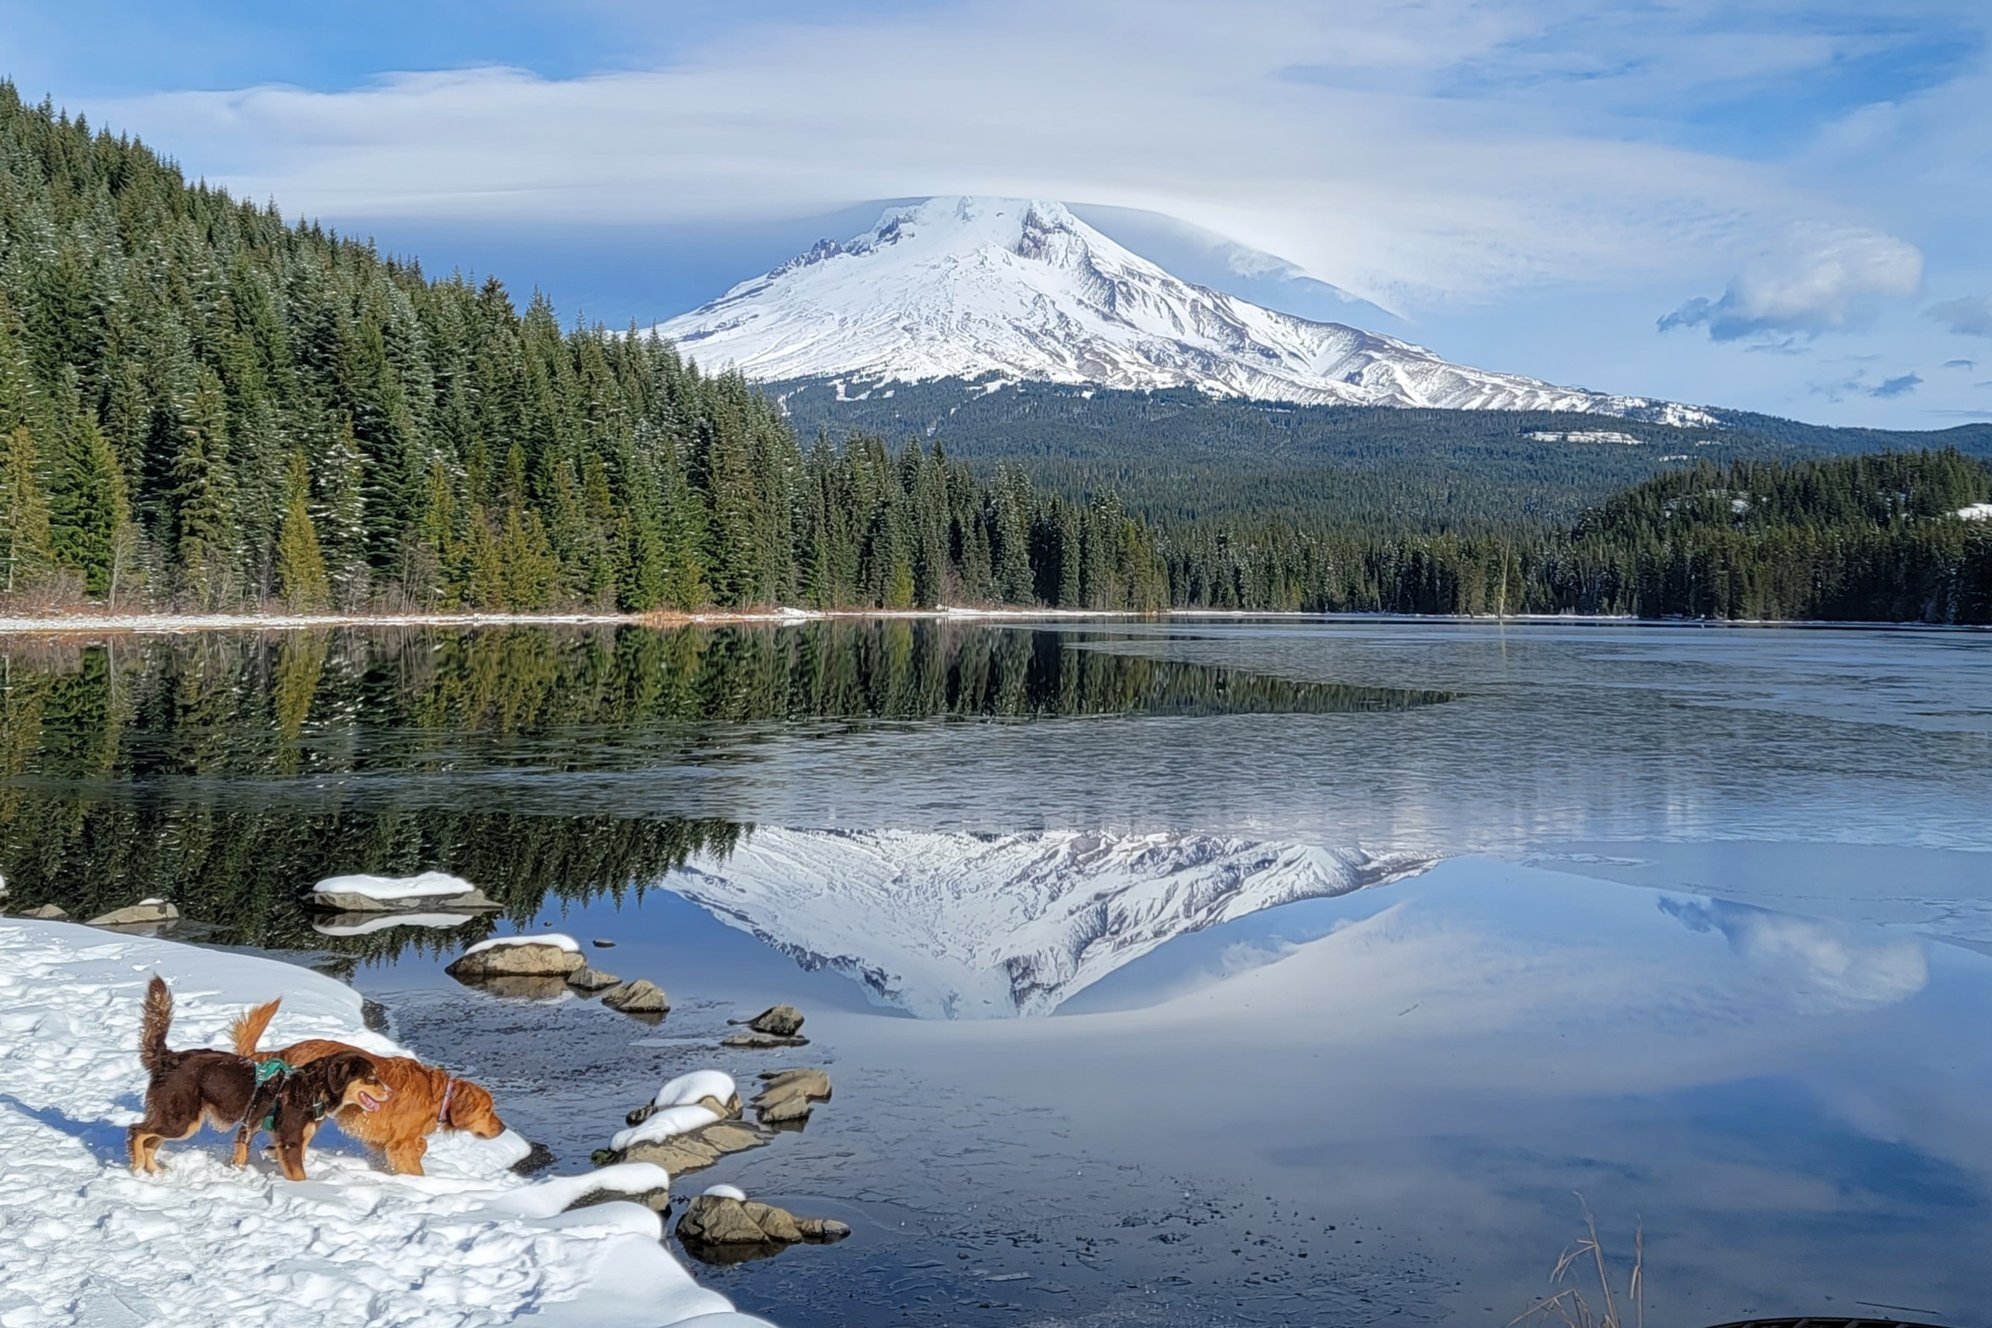 Two dogs checking out the reflection of Mt. Hood in a snowy lake